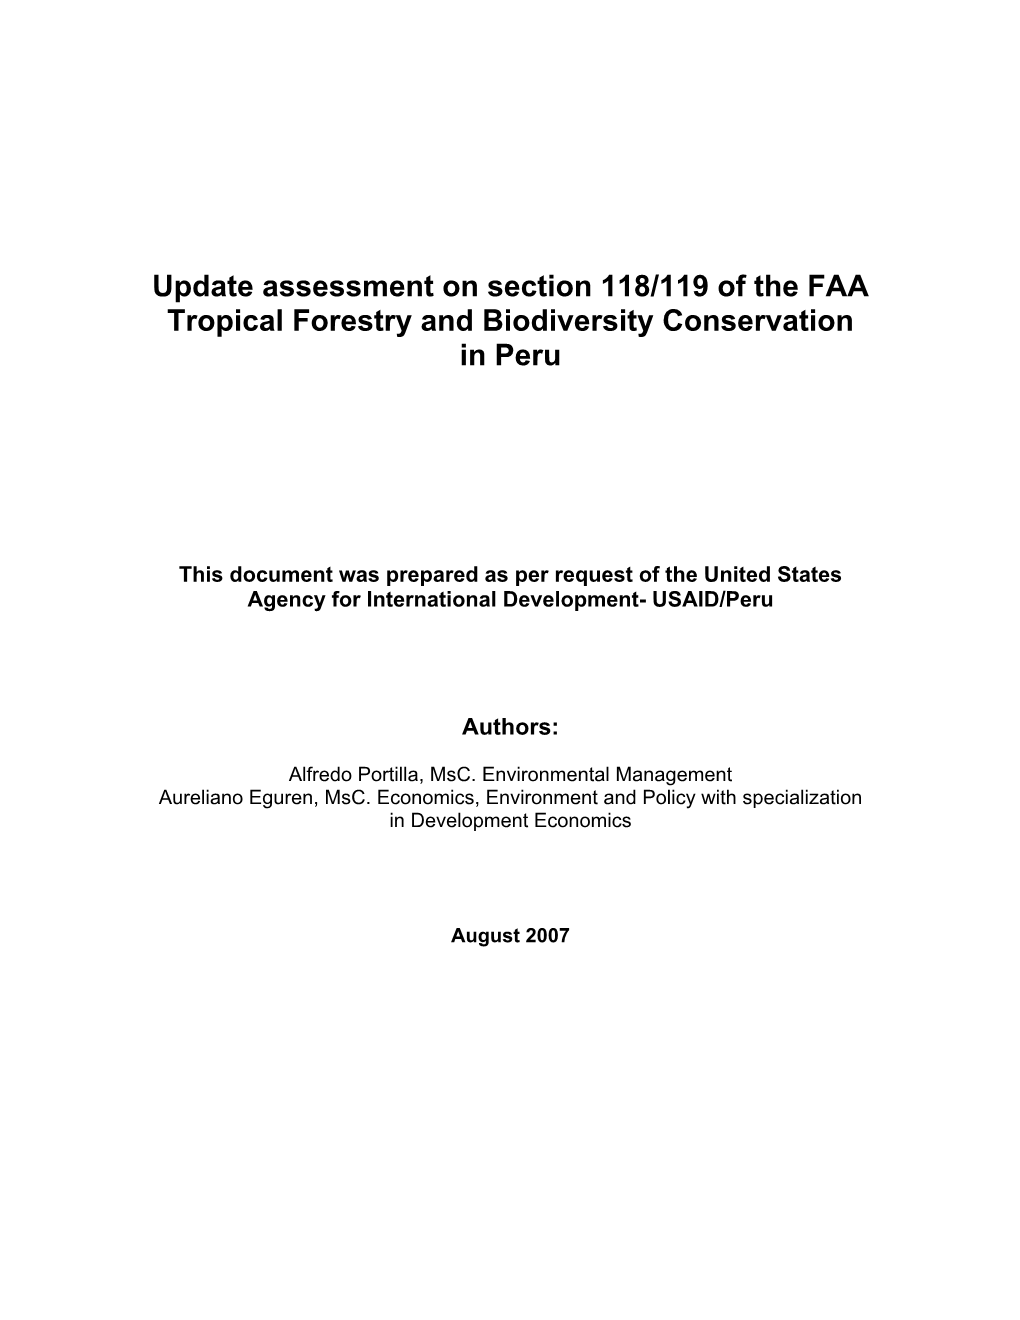 Update Assessment on Section 118/119 of the FAA Tropical Forestry and Biodiversity Conservation in Peru